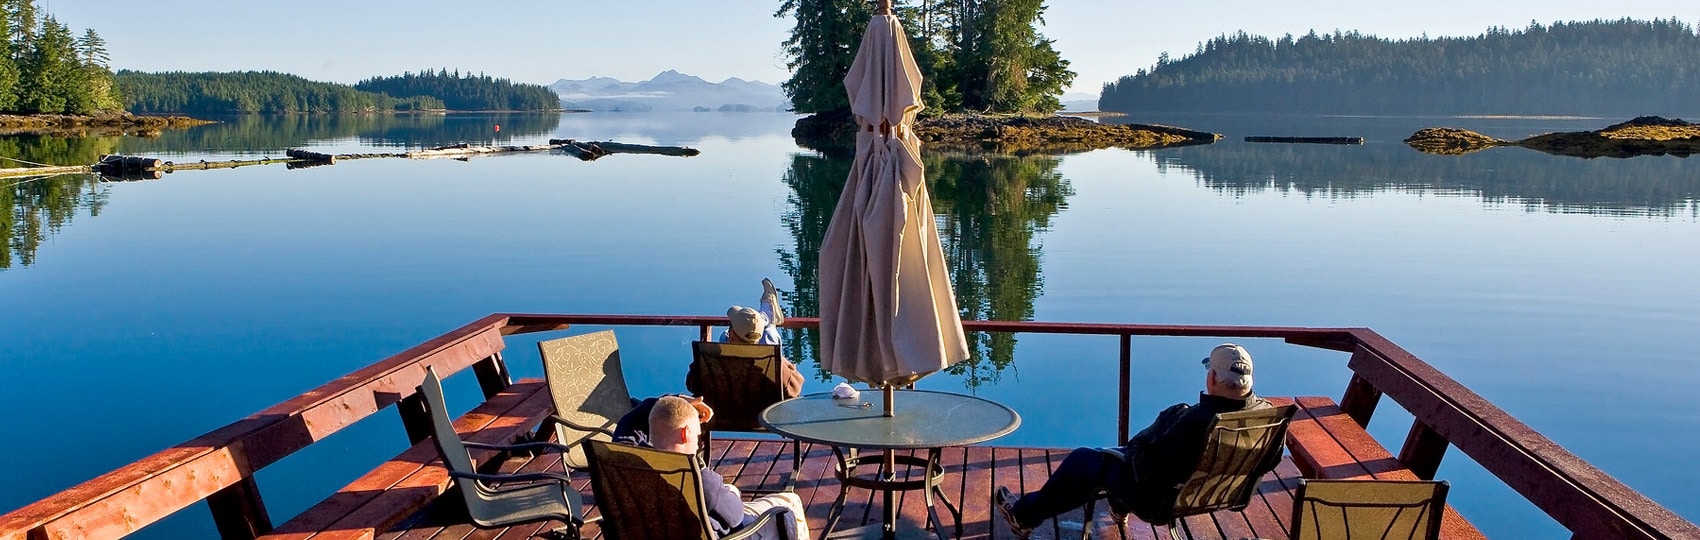 Guests enjoy the deck on a sunny day looking out over calm water.